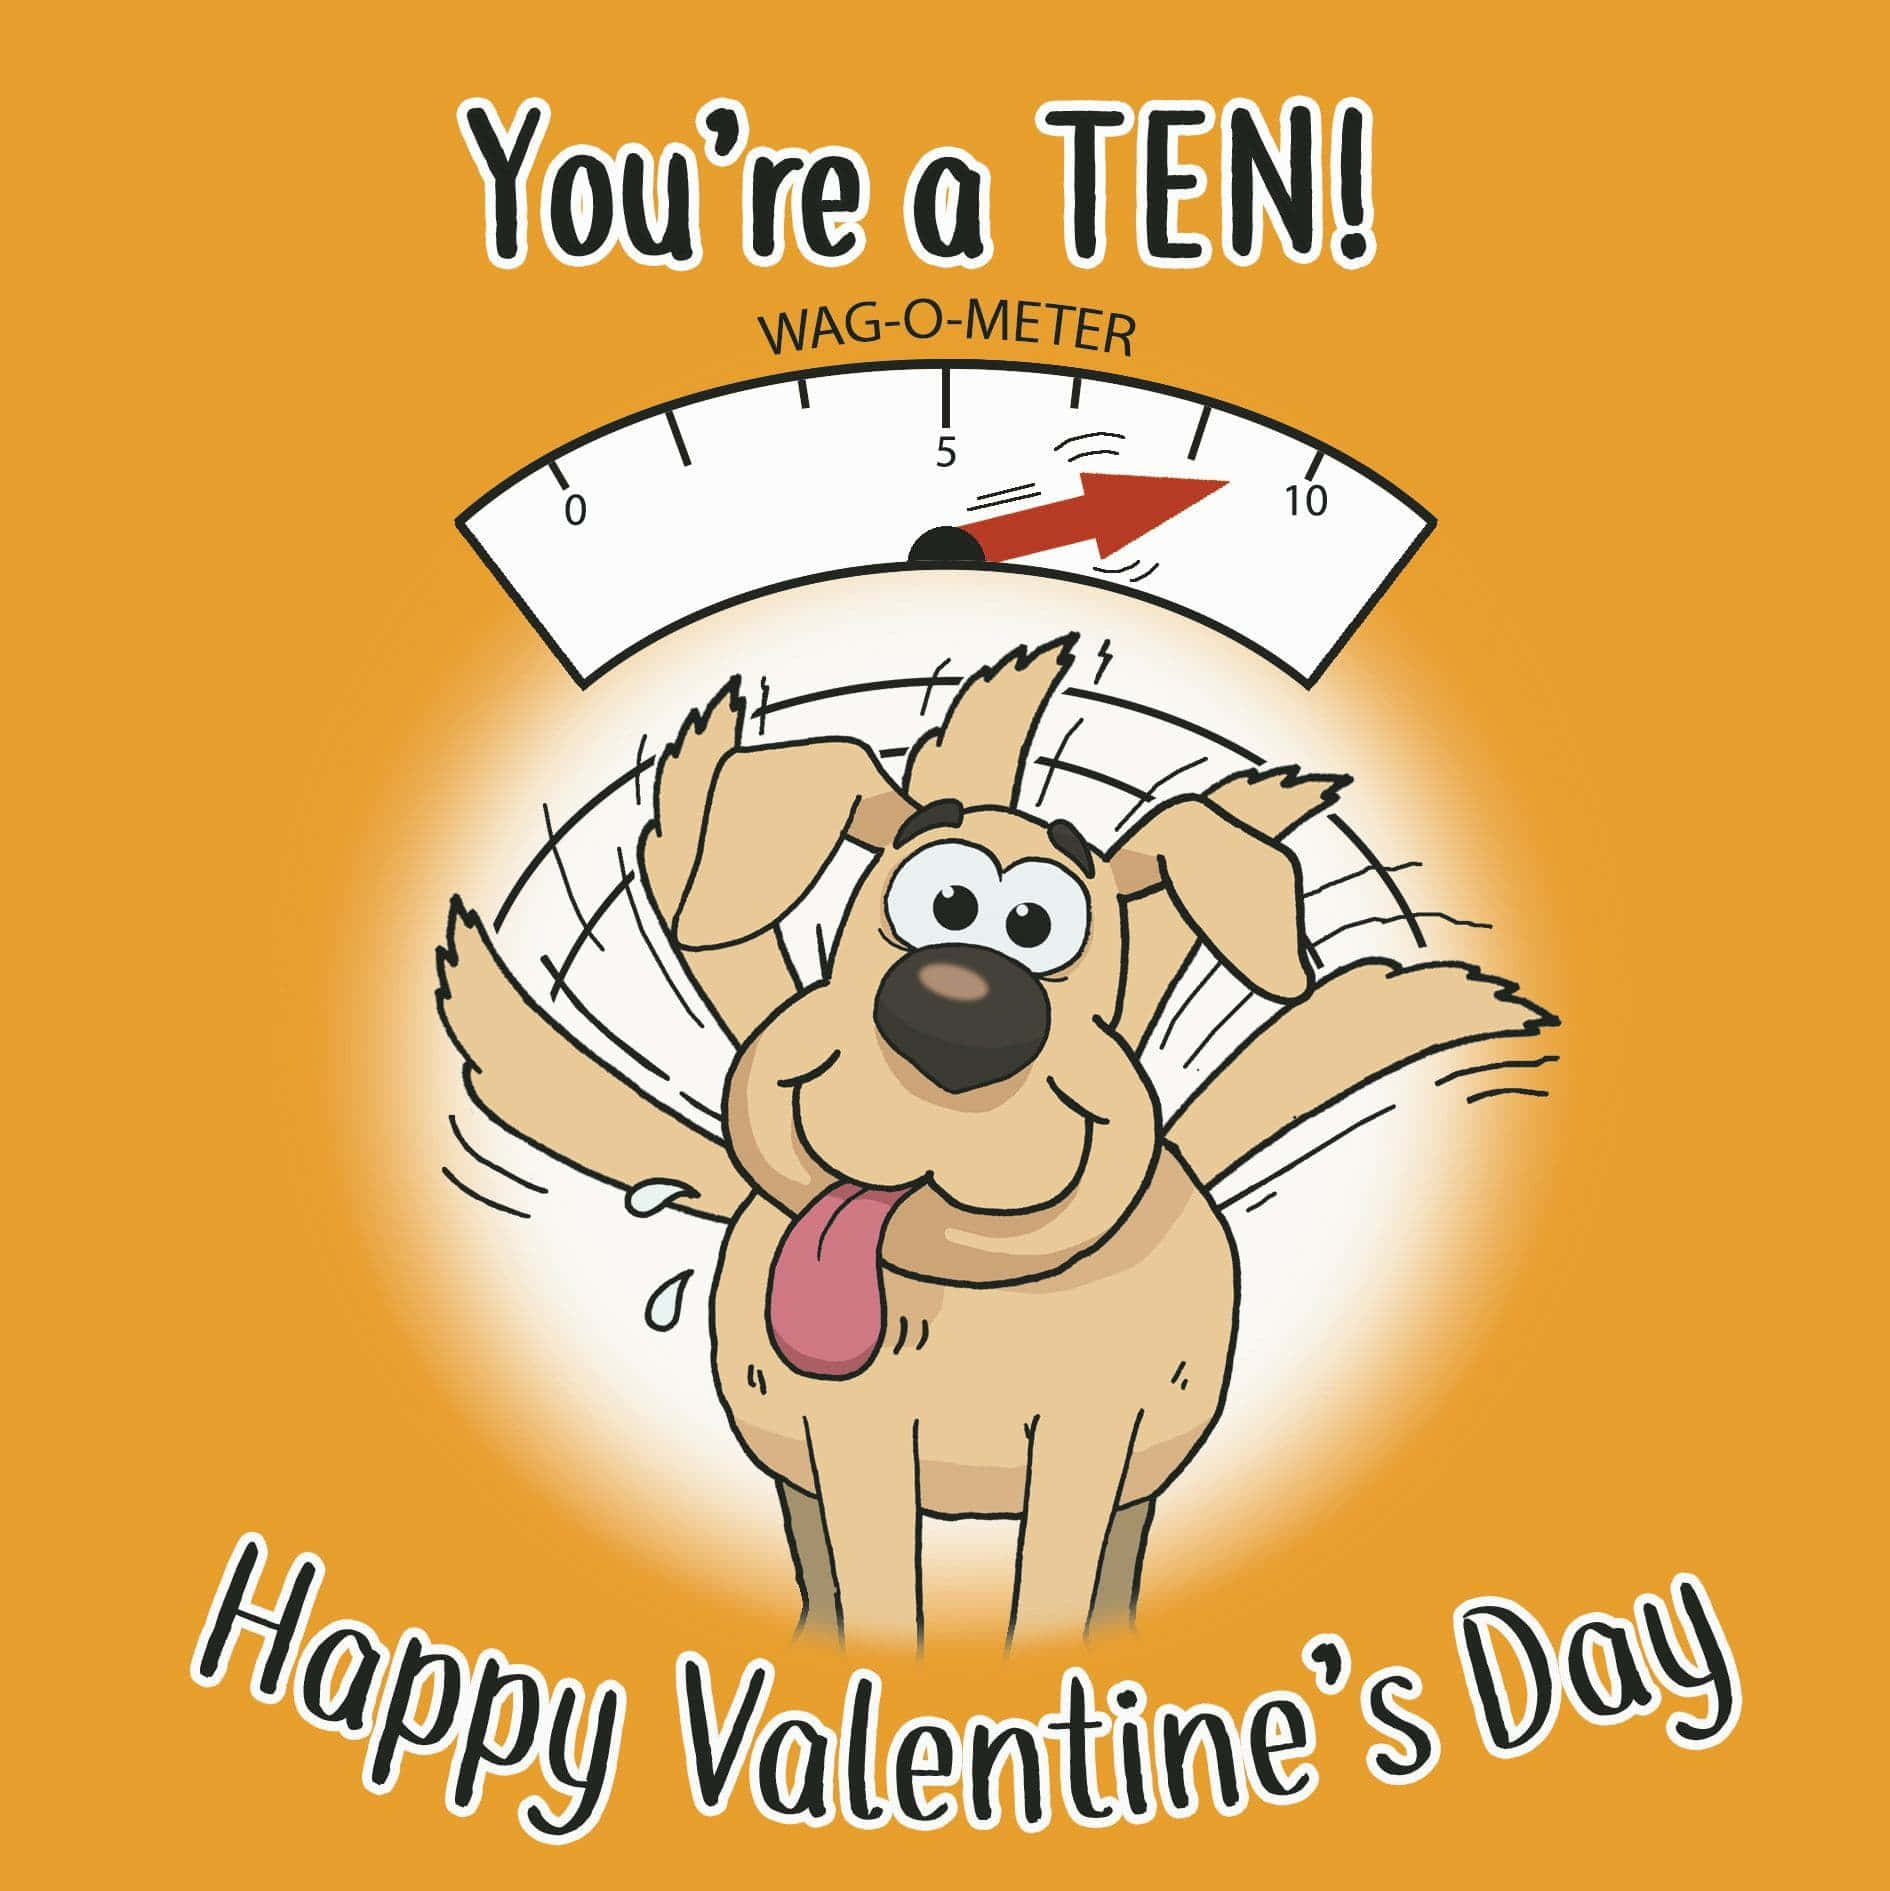 Cute Valentines Cartoon Dog Wagging Tail Picture